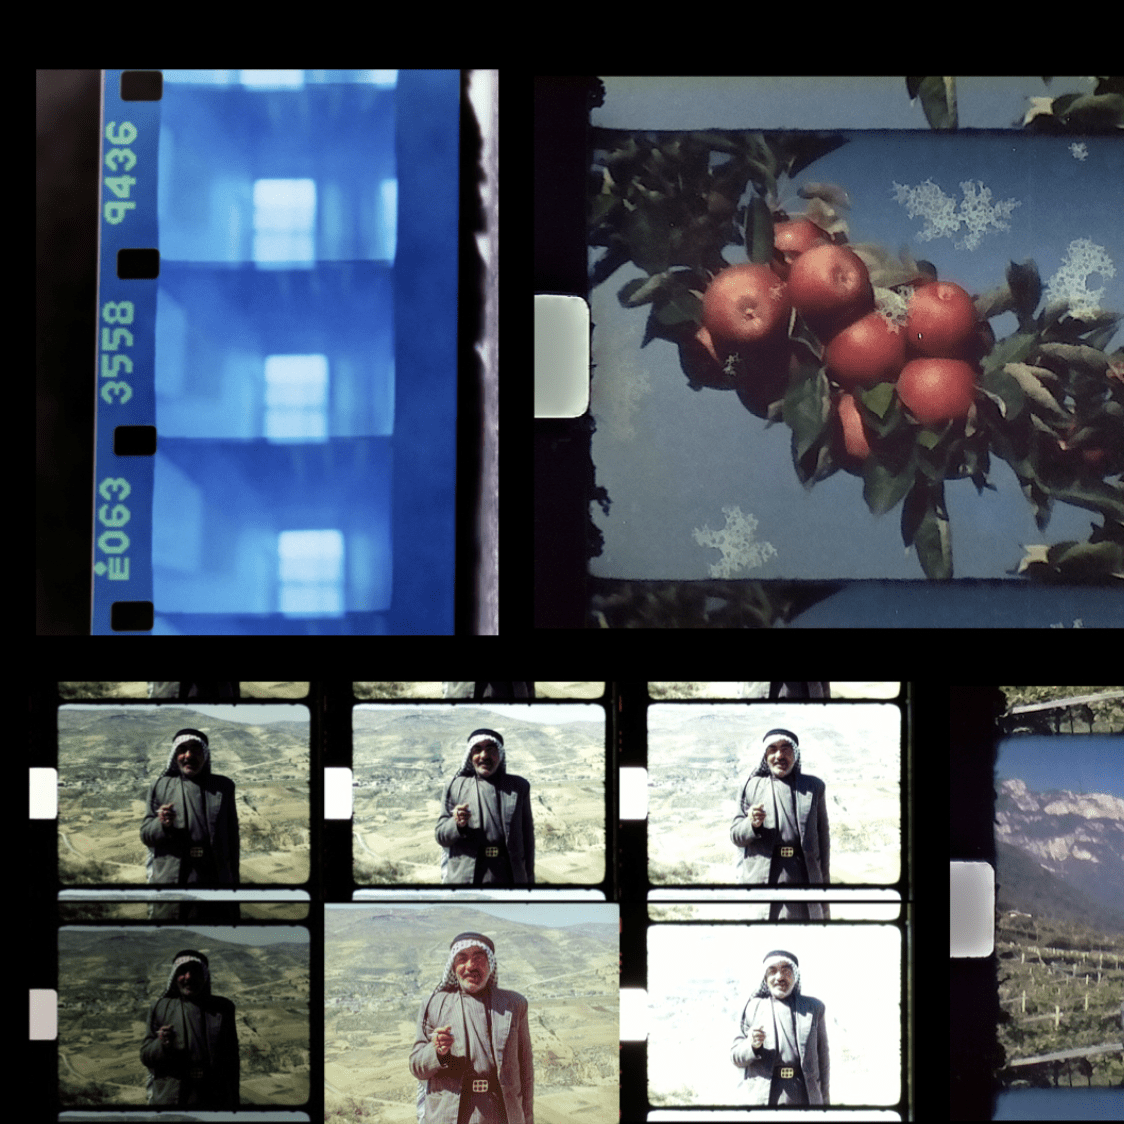 Collaged images of filmic material from the referenced Soviet film cannisters found in Amman